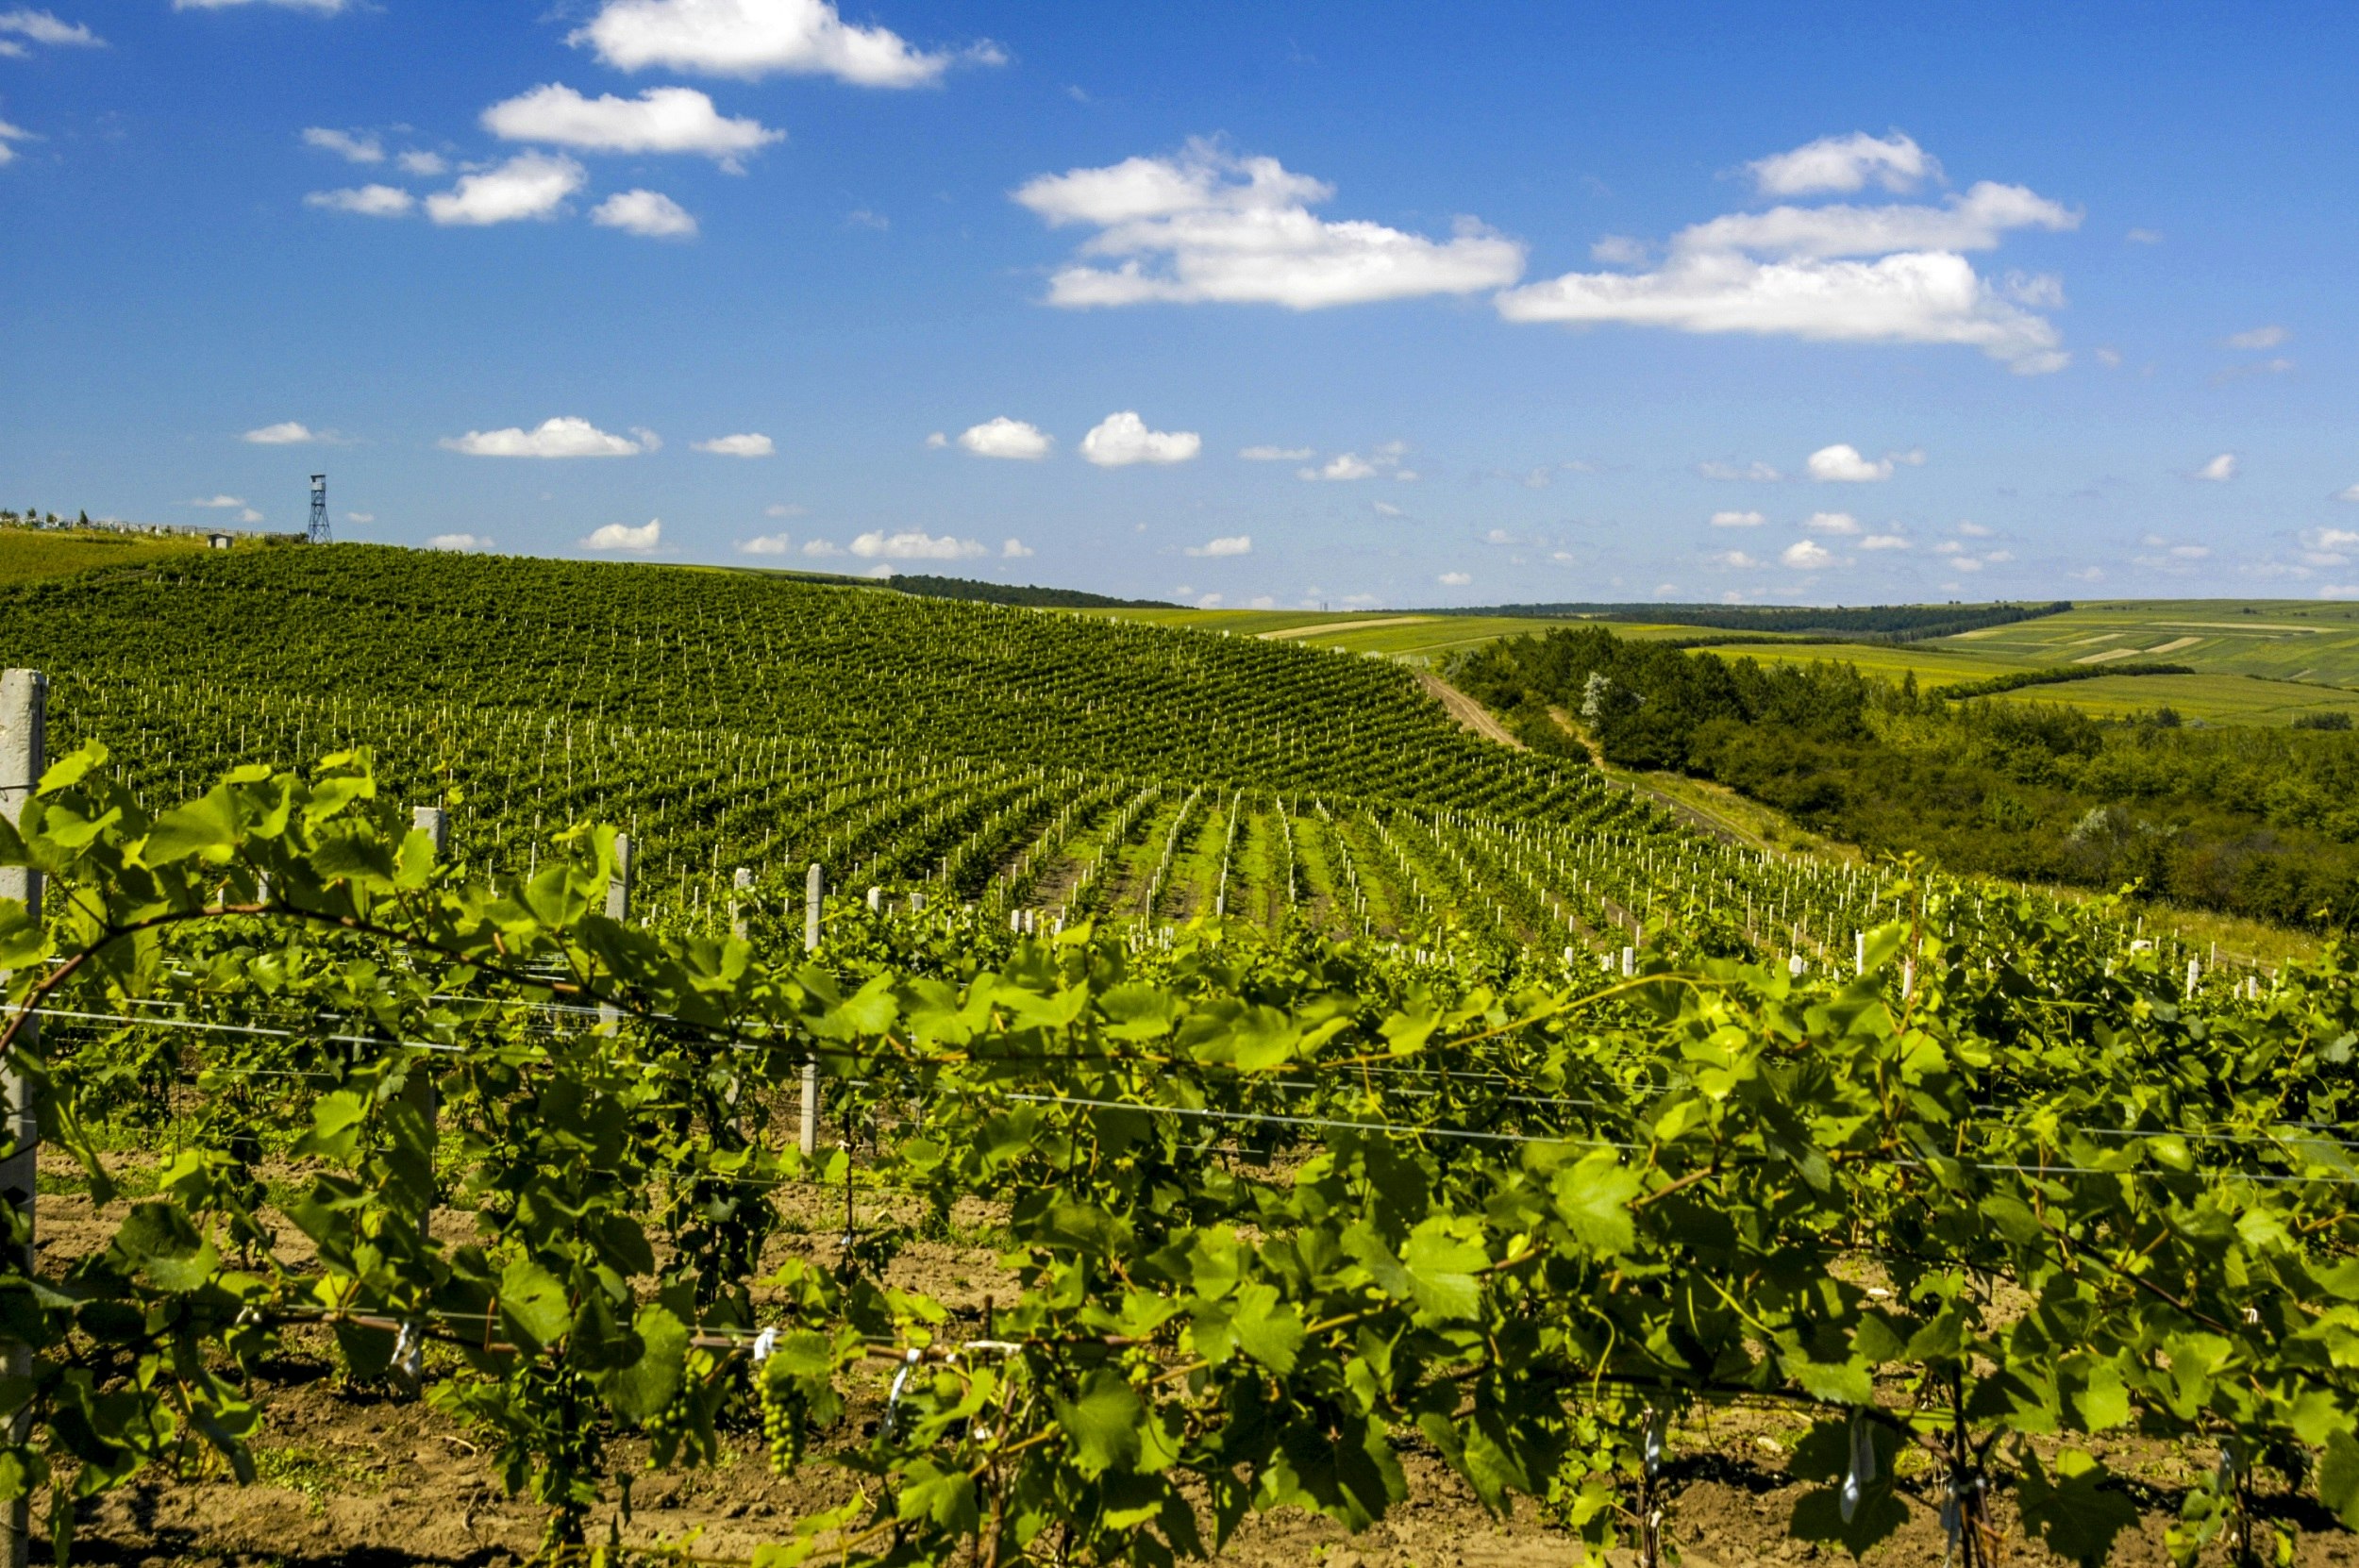 The sun shines on neat rows of bright green vines stretching to the horizon; the blue sky has a few small white clouds